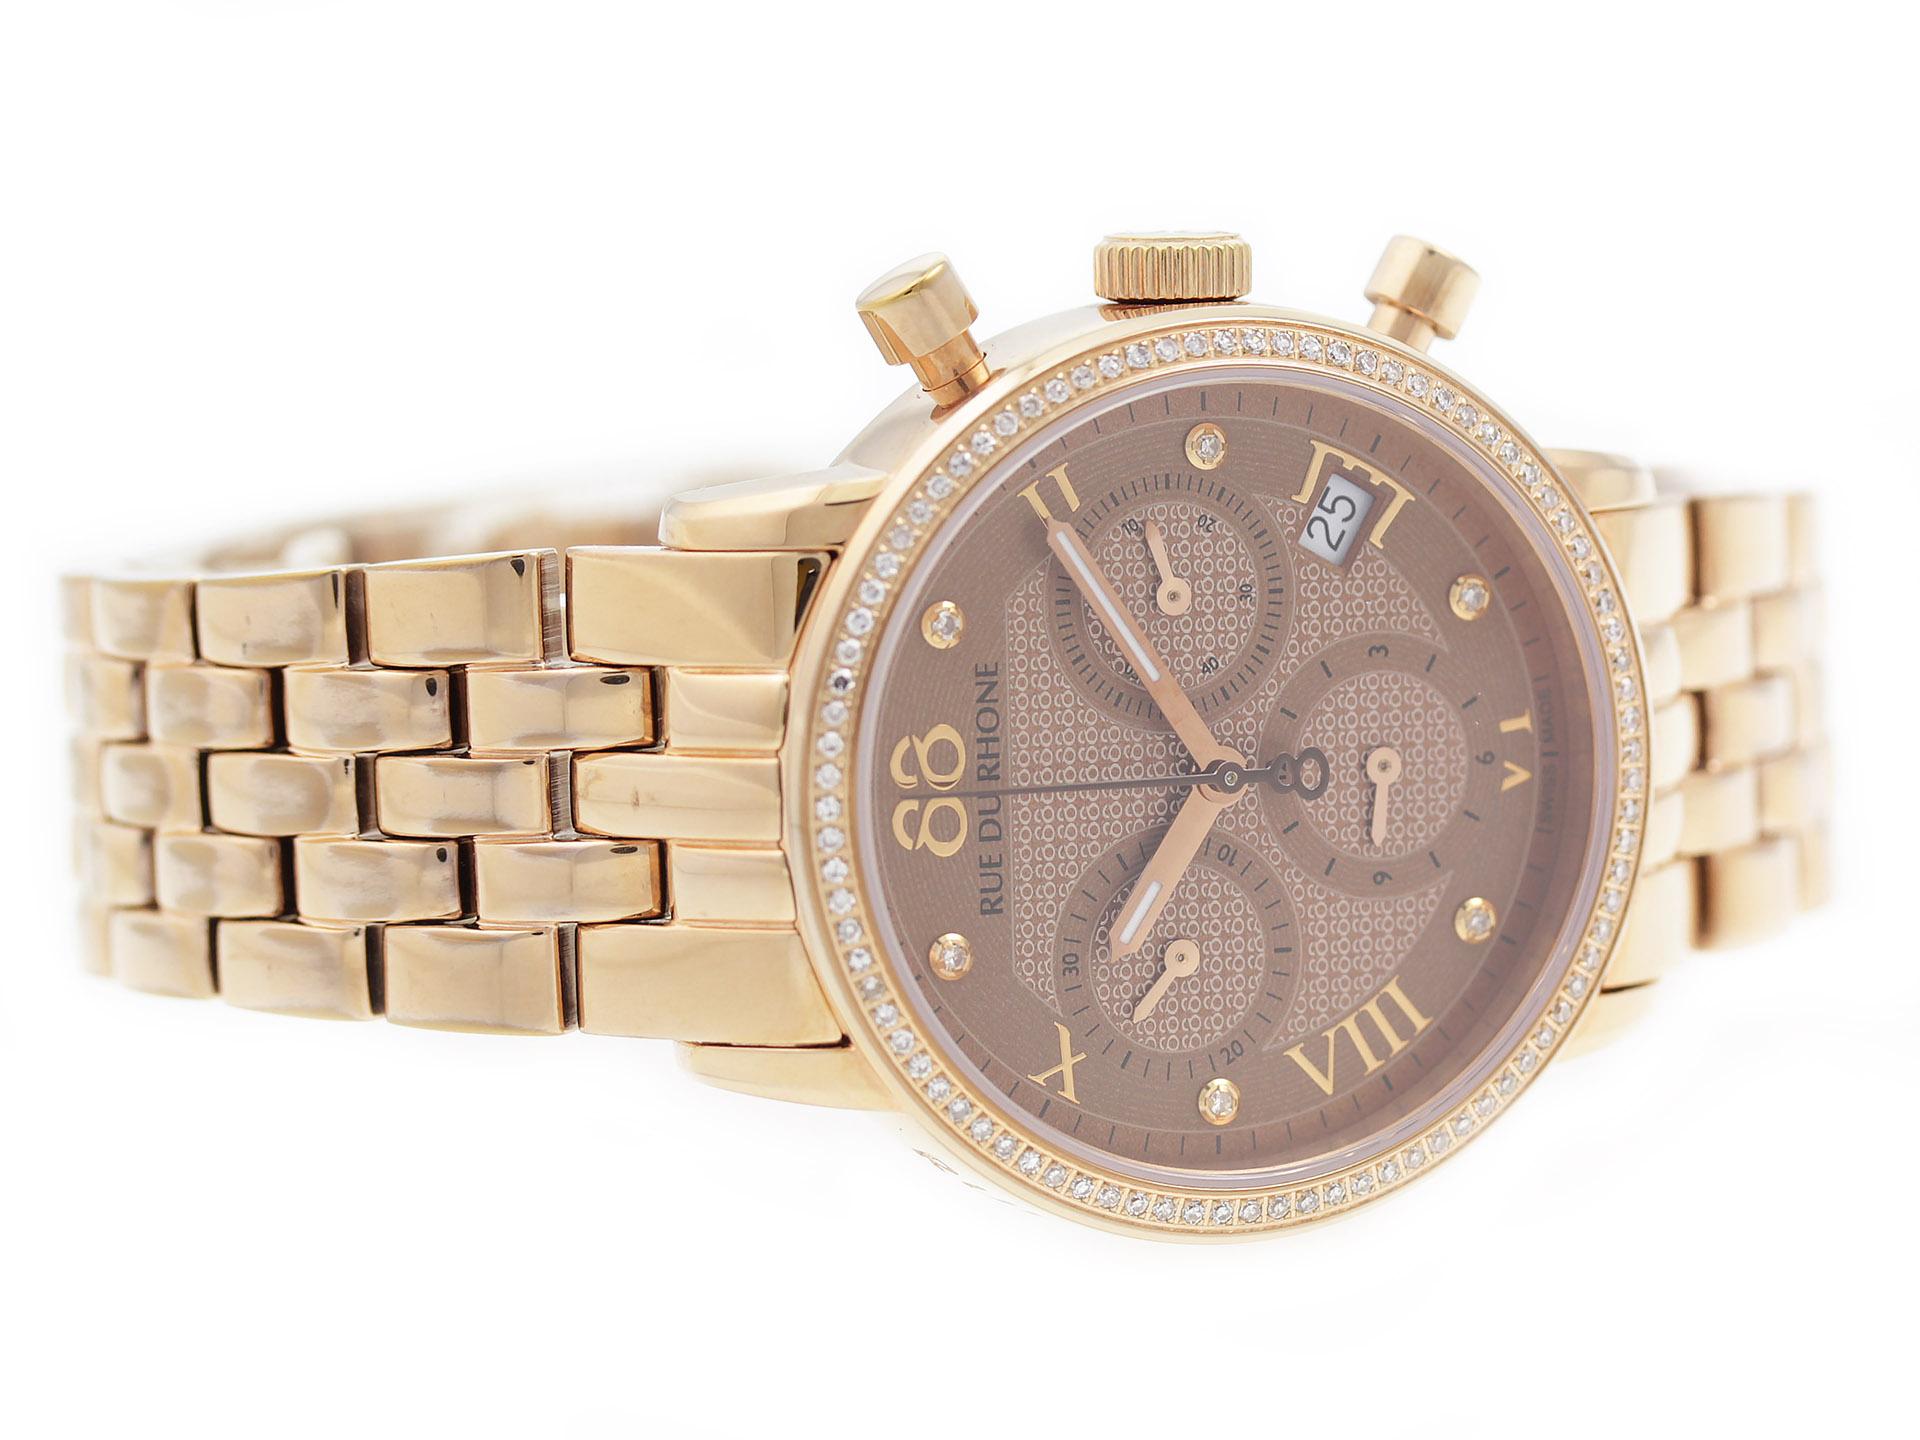 Rose gold tone steel 88 Rue Du Rhone Double 8 Origin 87WA130002 watch, water resistant to 50m, with date, chronograph, and bracelet.

Watch	
Brand:	88 Rue Du Rhone
Series:	Double 8
Model #:	87WA130002
Gender:	Ladies’
Condition:	Pristine Condition